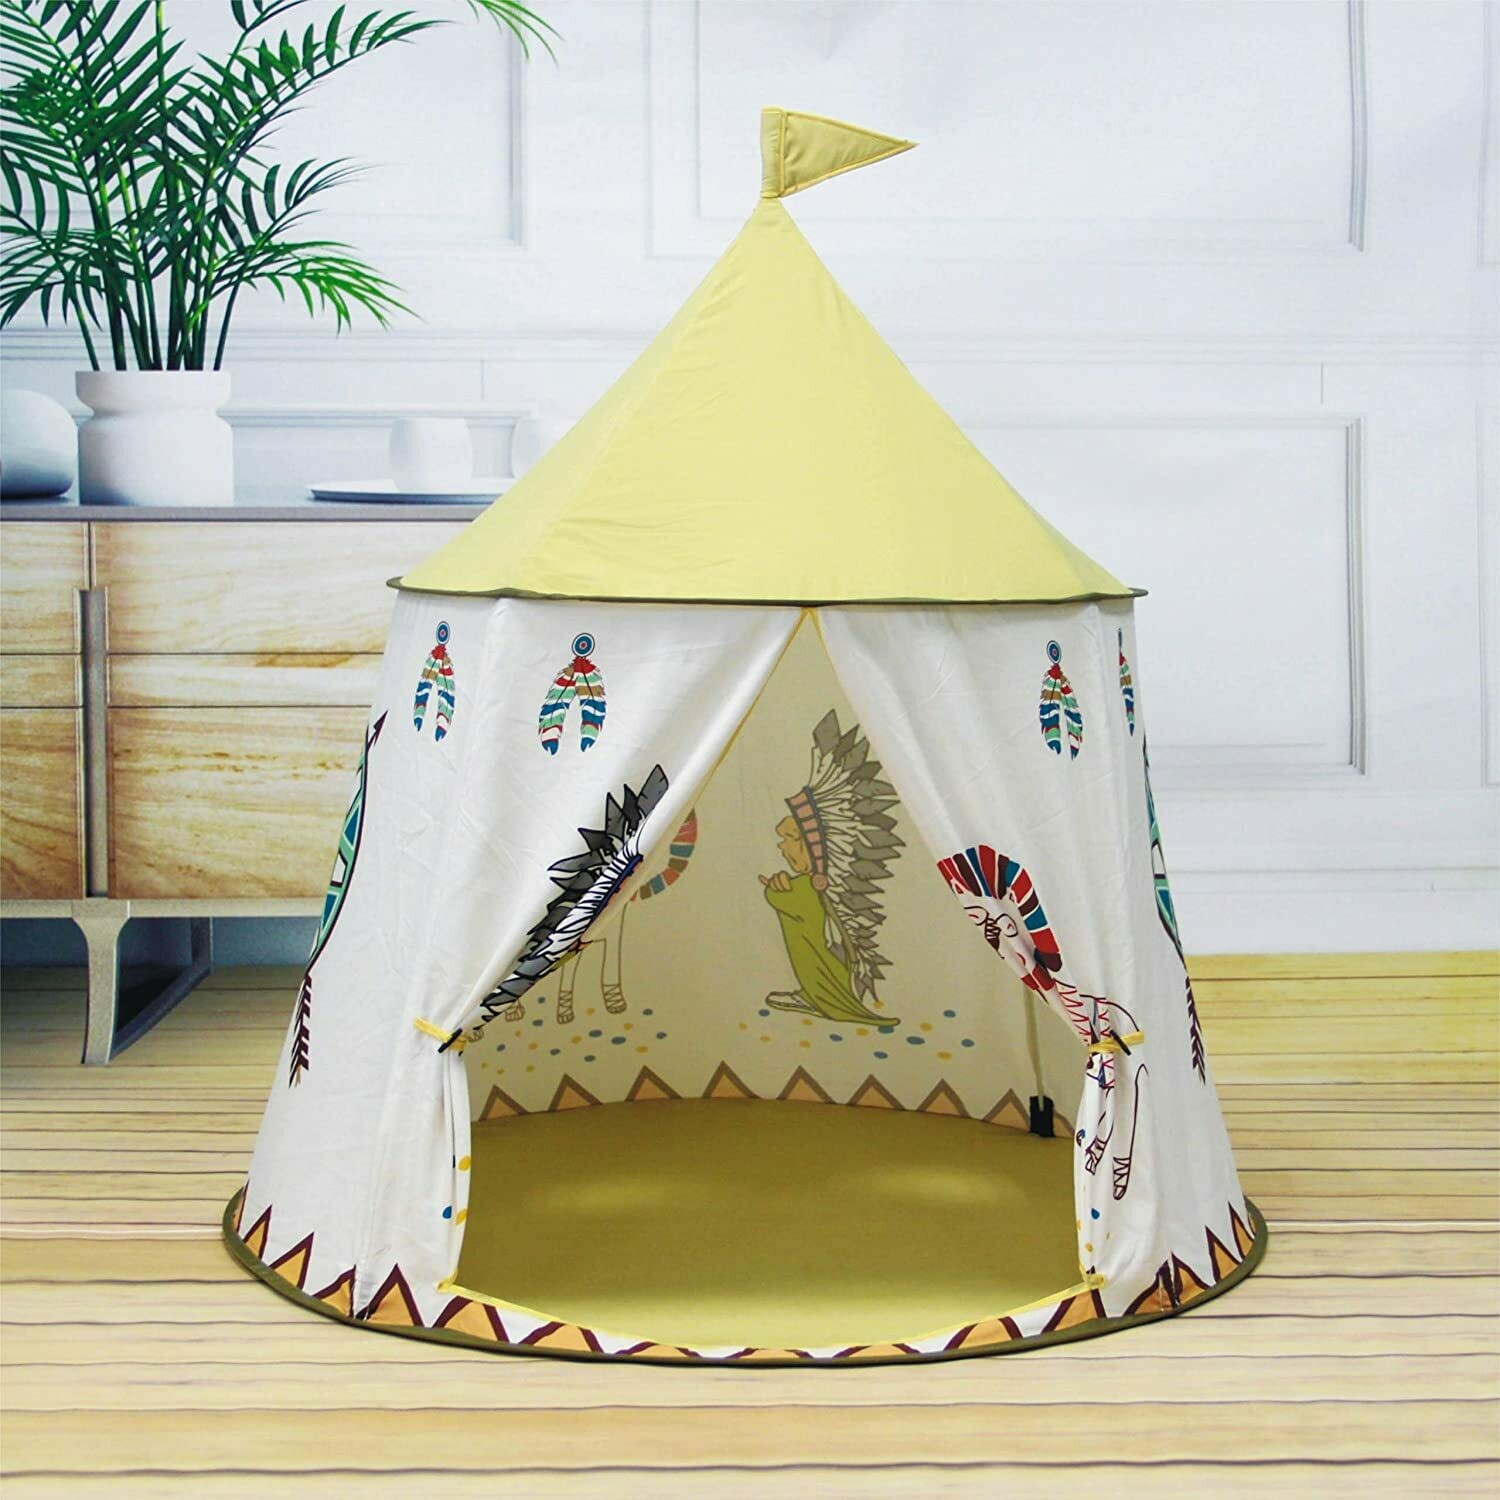 Play Tent Kids Teepee Tent for Kids Pop Up Foldable Playhouse